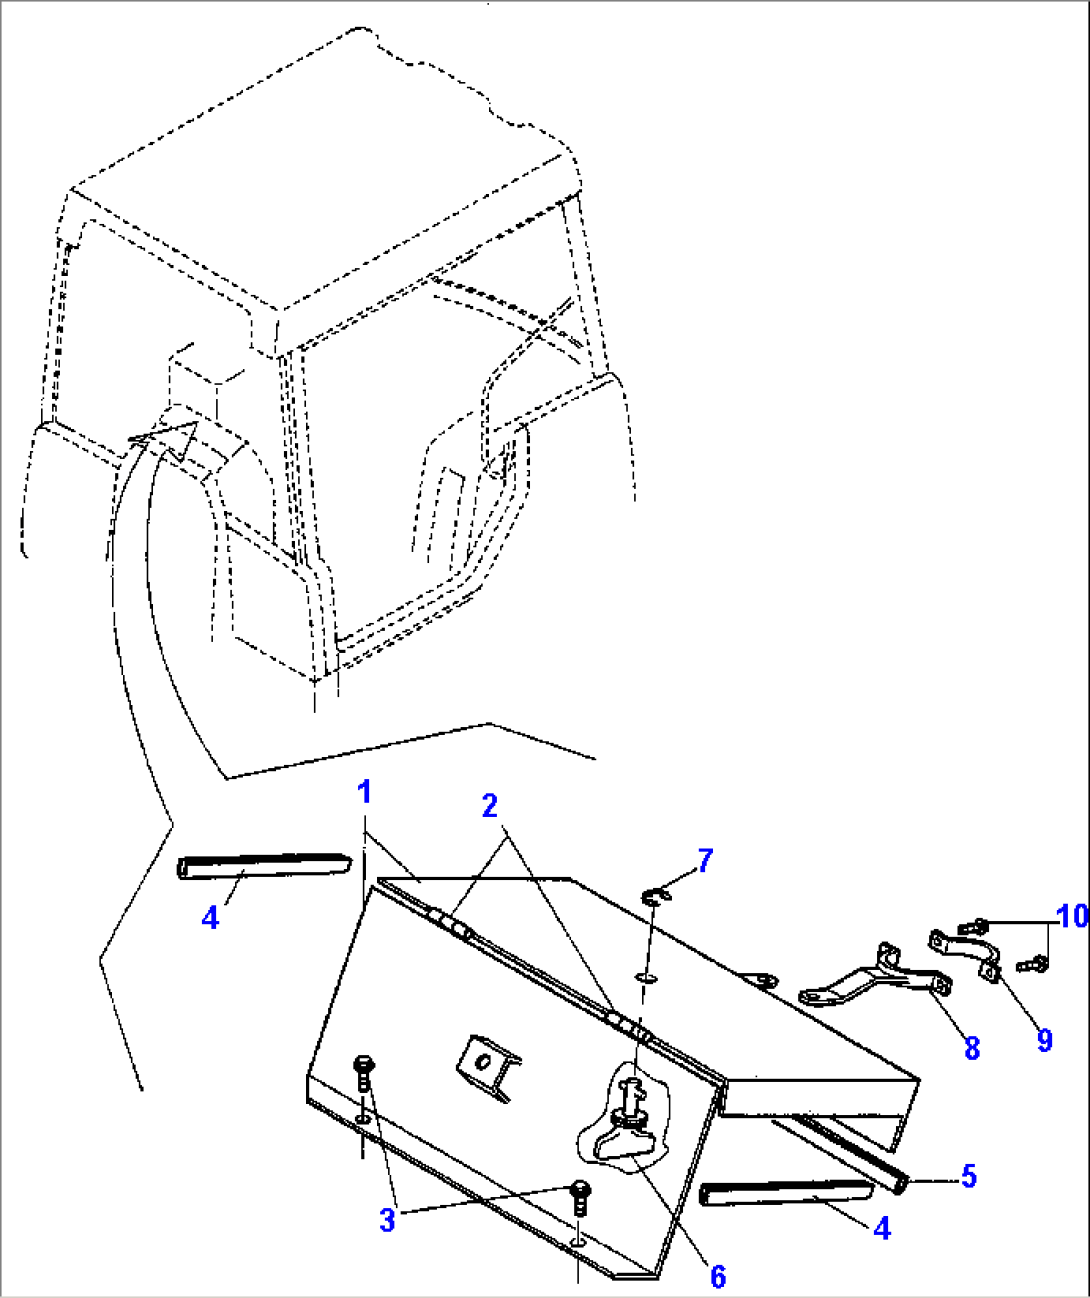 INSTRUMENT BOX AND ATTACHING PARTS, CANOPY